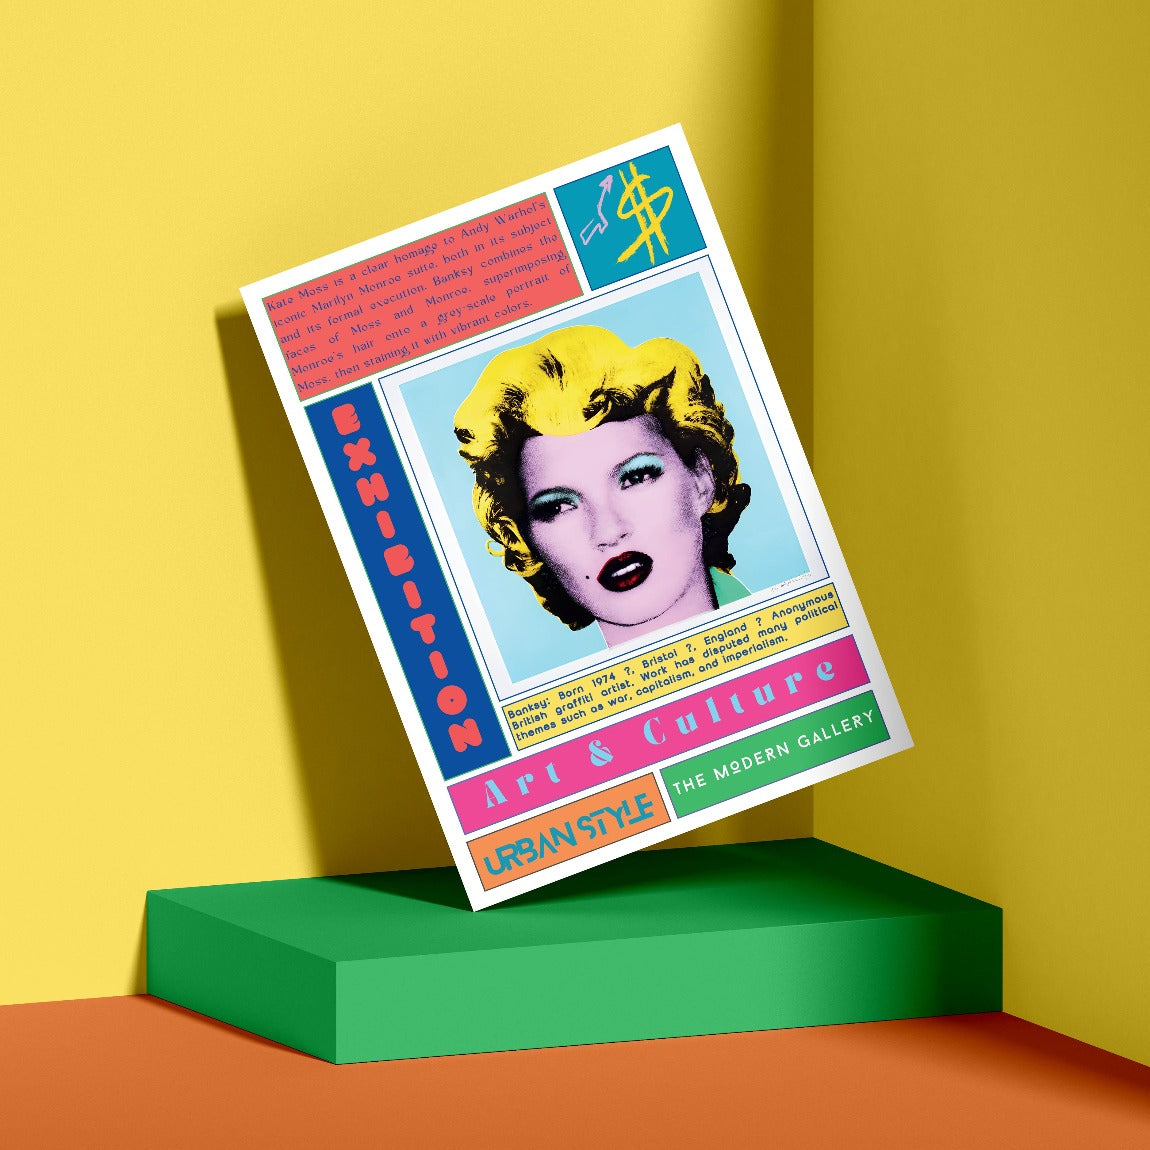 The Kate Moss Street Art Poster pays homage to the iconic Marilyn Monroe suite by Andy Warhol. Banksy combines Moss and Monroe's faces, superimposing Monroe's hair onto a grey-scale portrait of Moss and adding vibrant stains. A must-have for art enthusiasts and fans of both models.